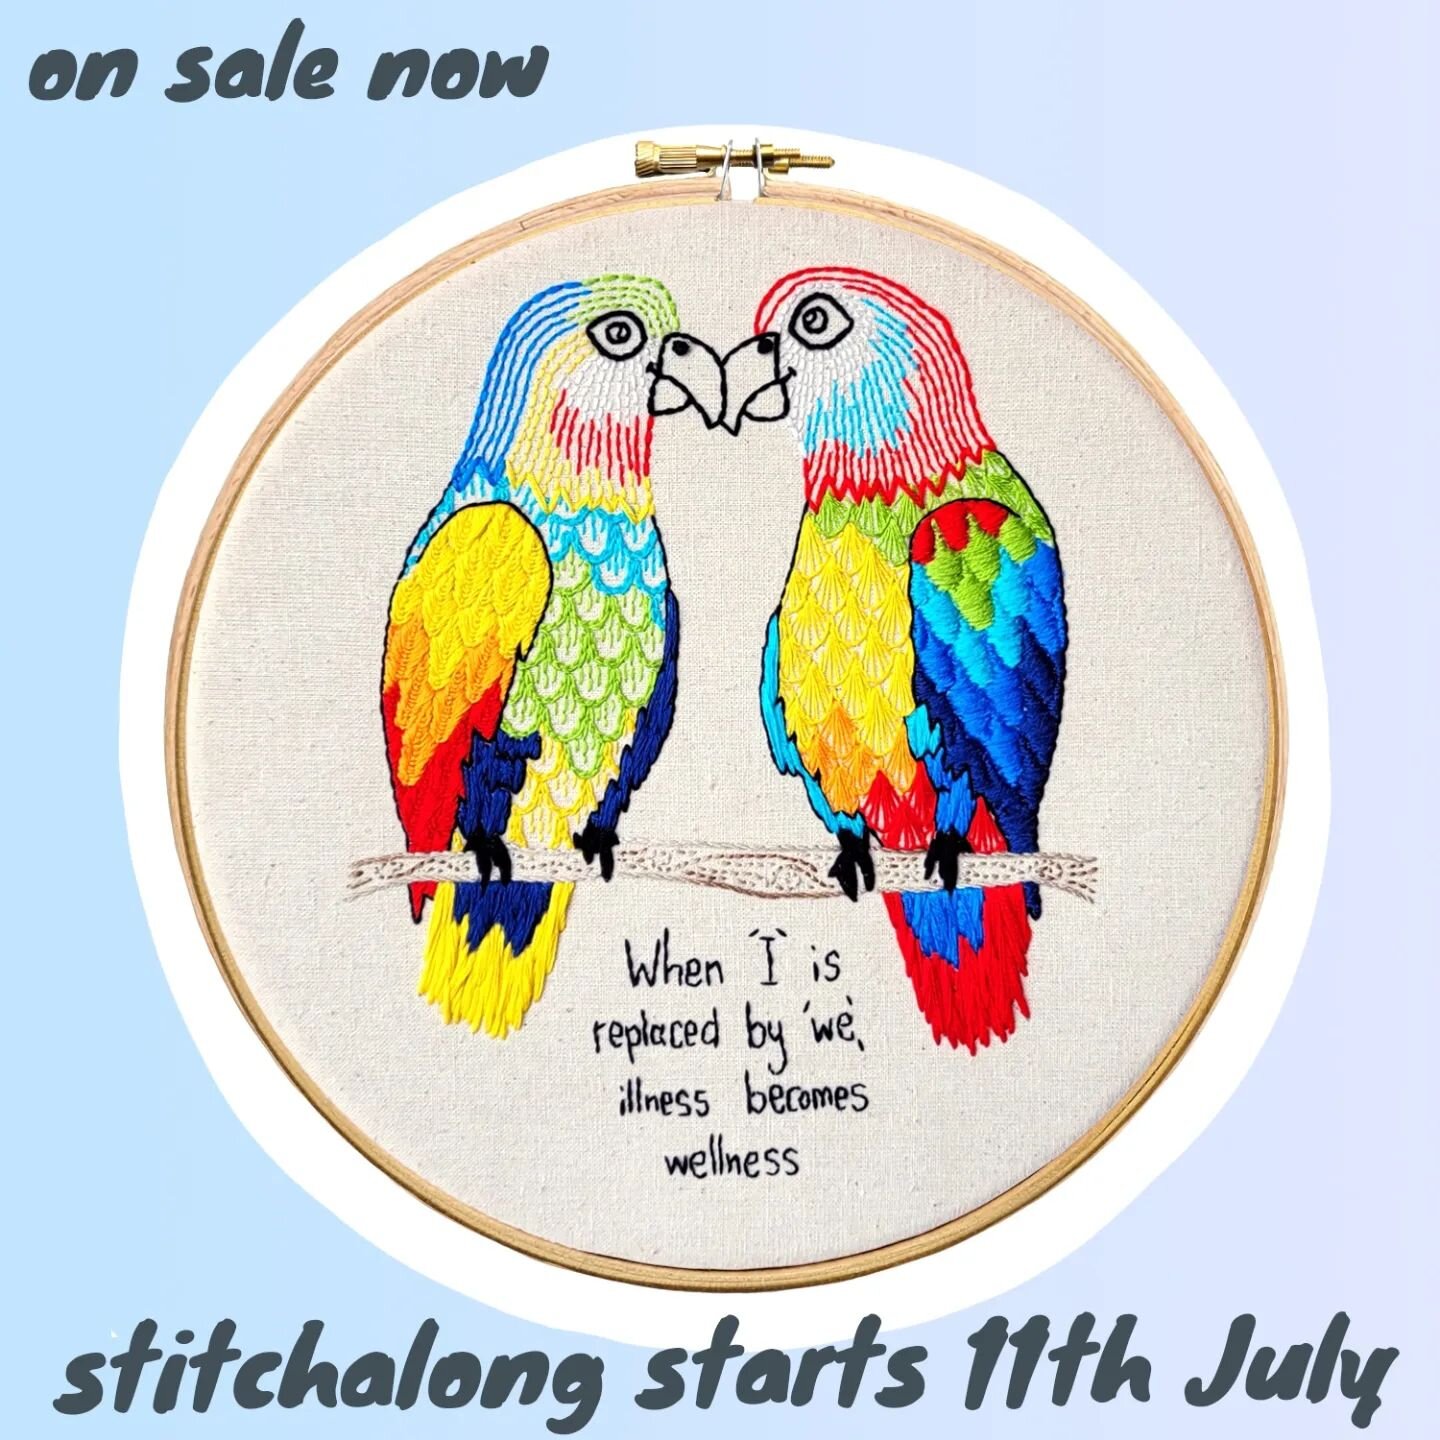 C0vid might have finally got me after two and a half years but it's not going to stop me launching a new stitchalong! We'll be starting this one on 11th July so it'll make the perfect Summer project. And those colours!? 🦜😍🦜

Whether you prefer esc